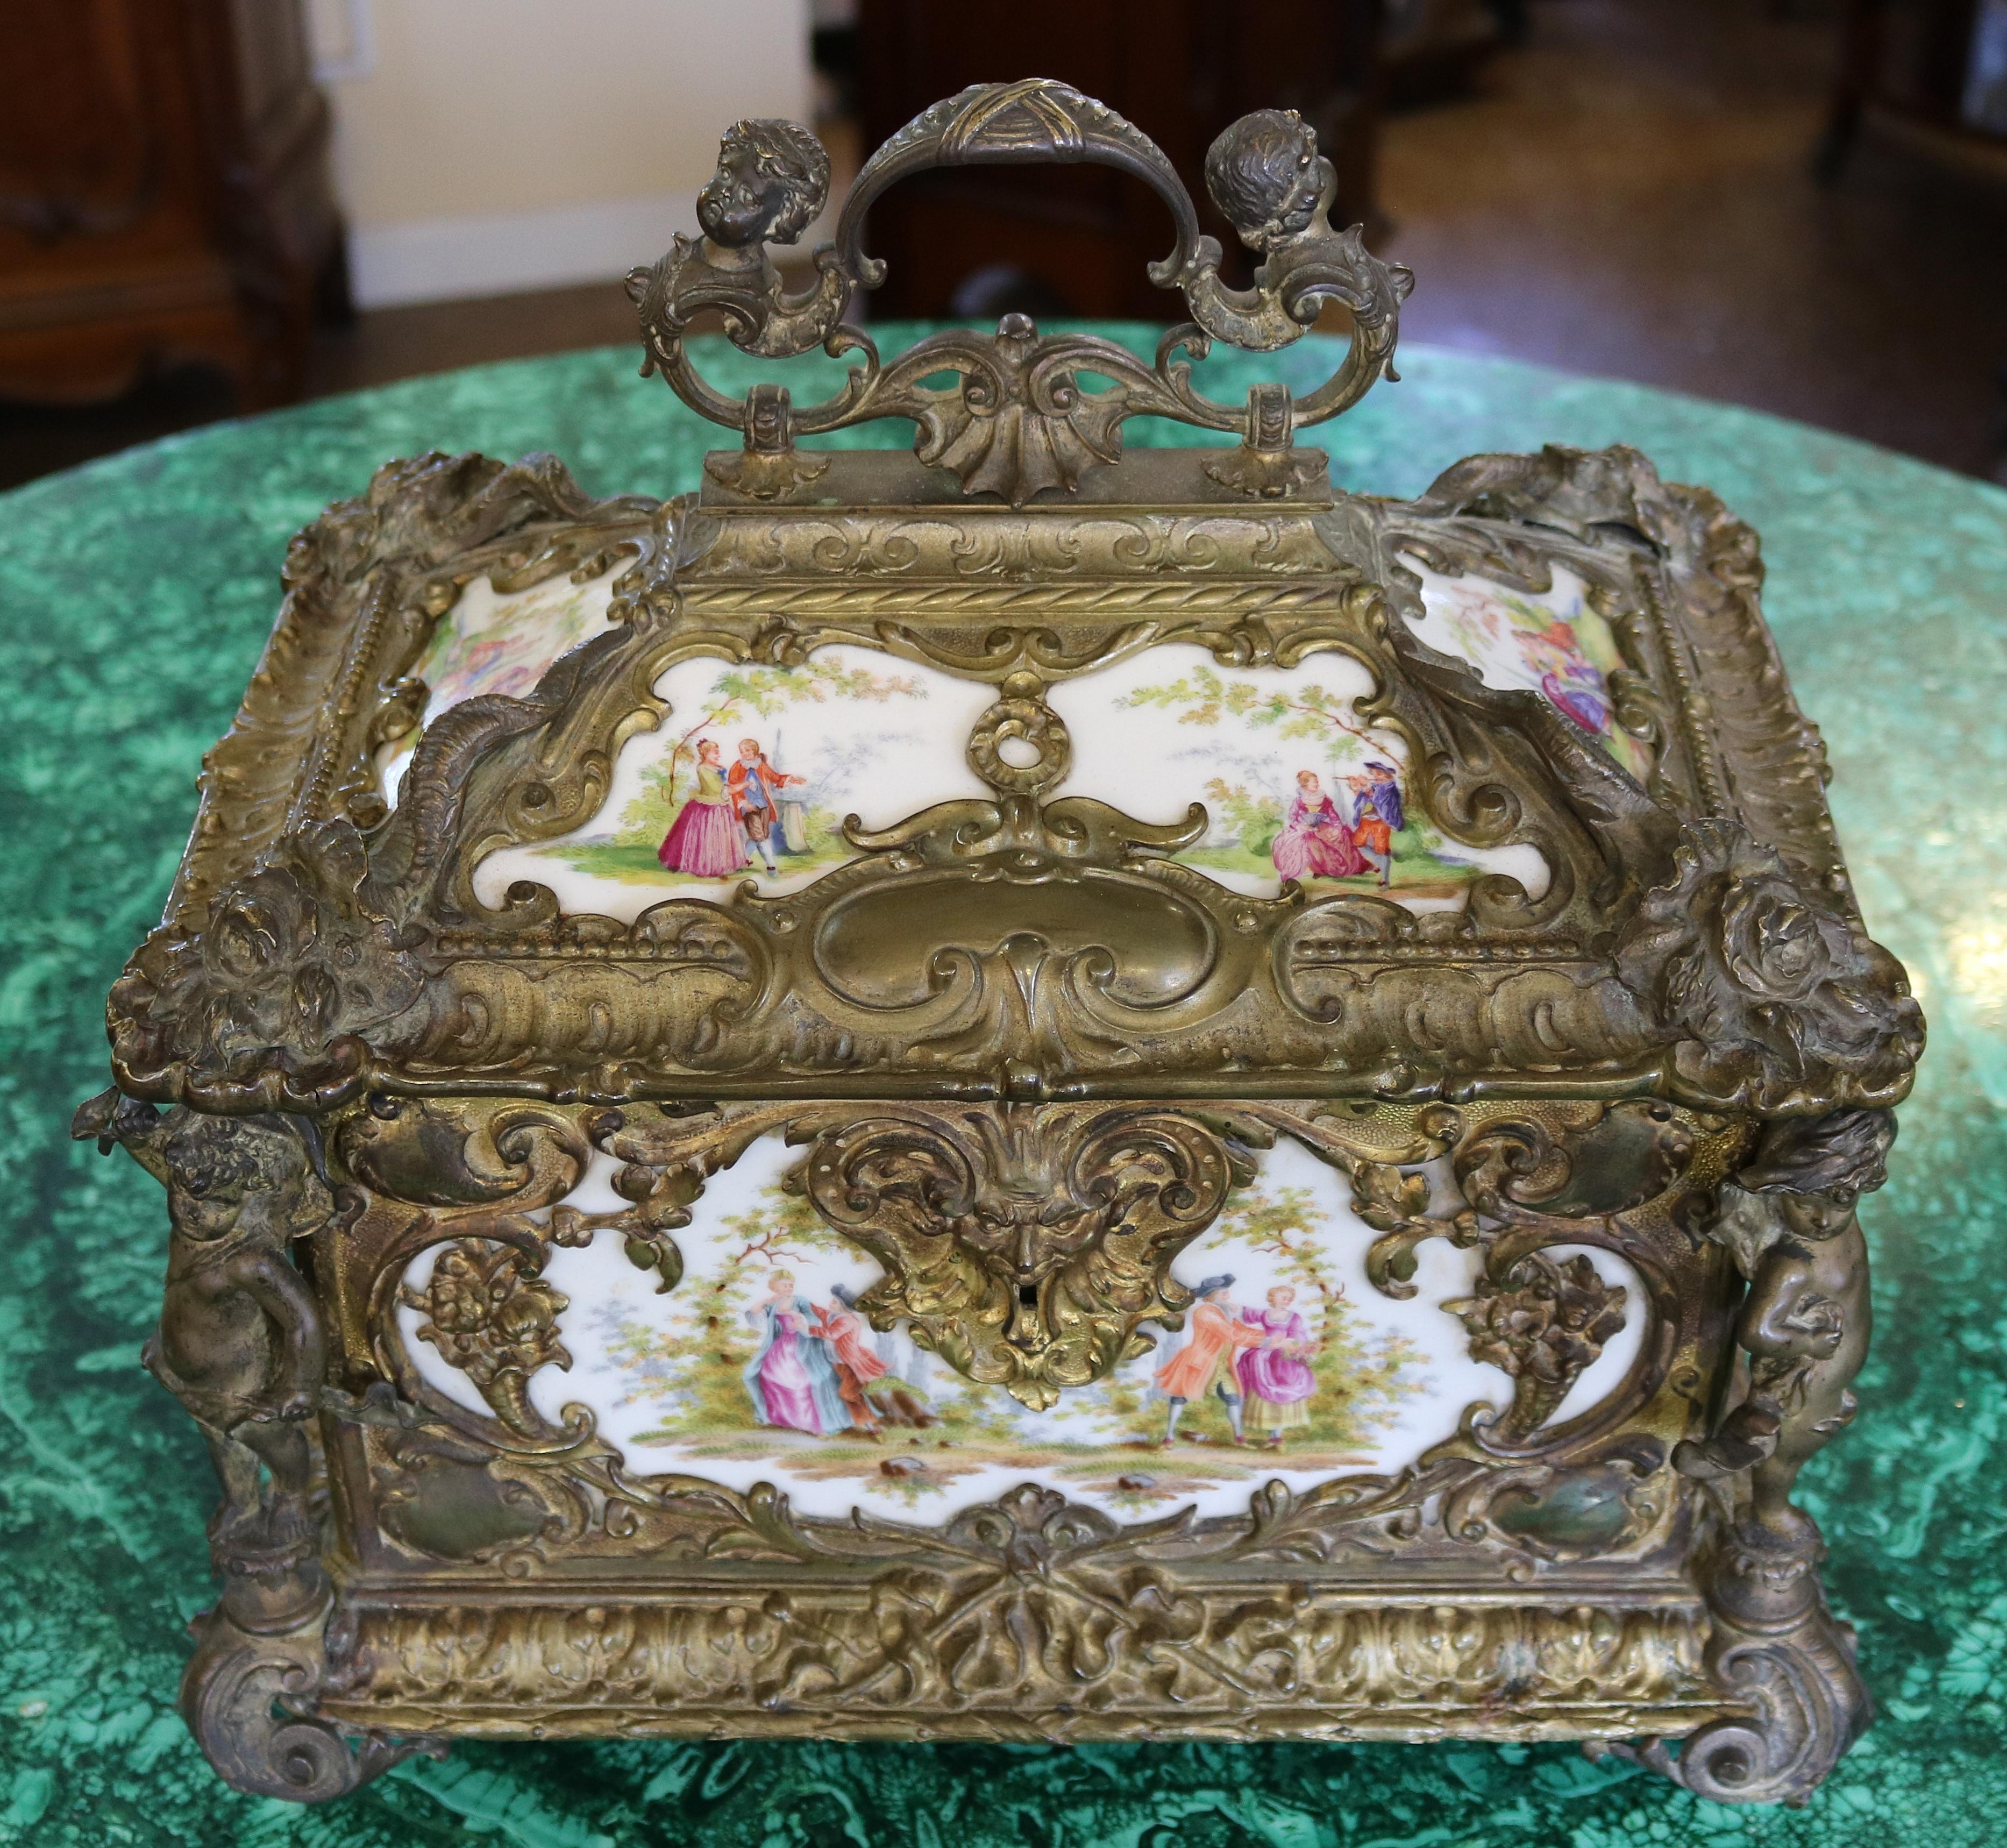 ​Outstanding Large 19th Century Bronze & Porcelain Jewelry Casket Box

Dimensions : 14